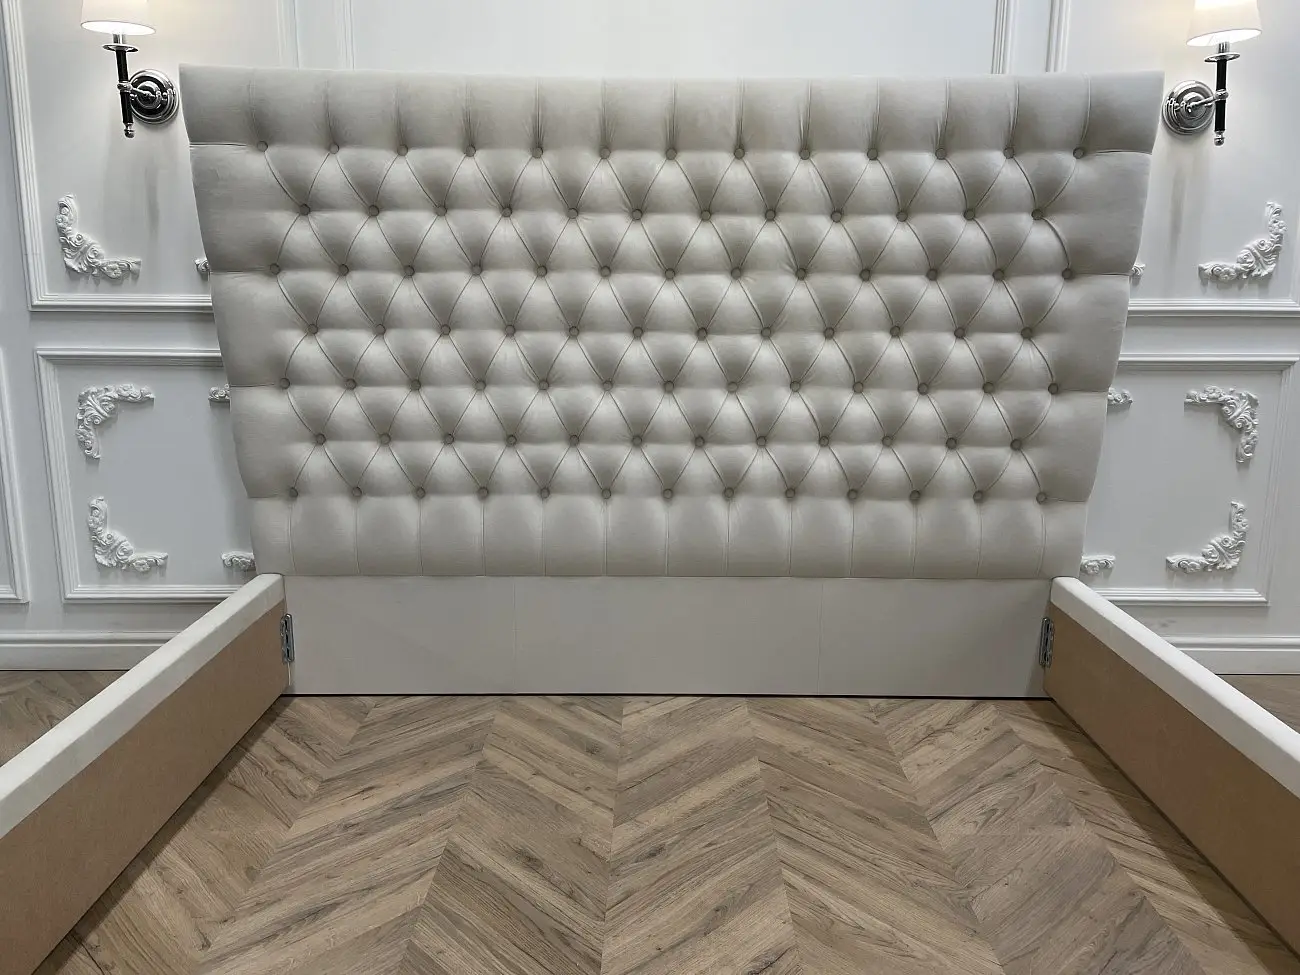 Euro bed with upholstered headboard 200x200 cm beige QuickSand